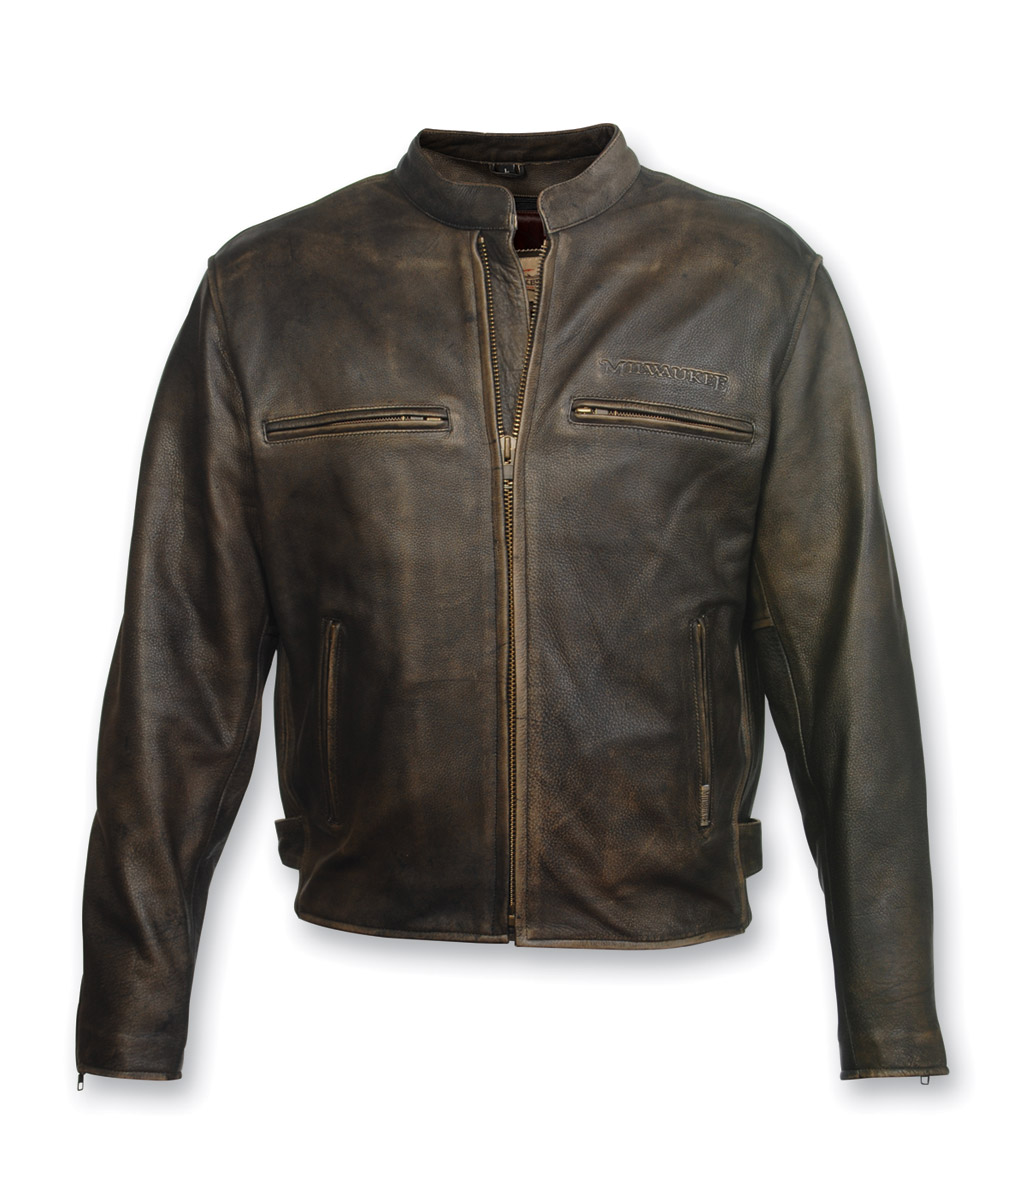 motorcycle jackets milwaukee motorcycle clothing co. crazy horse brown leather jacket bhfrrzb